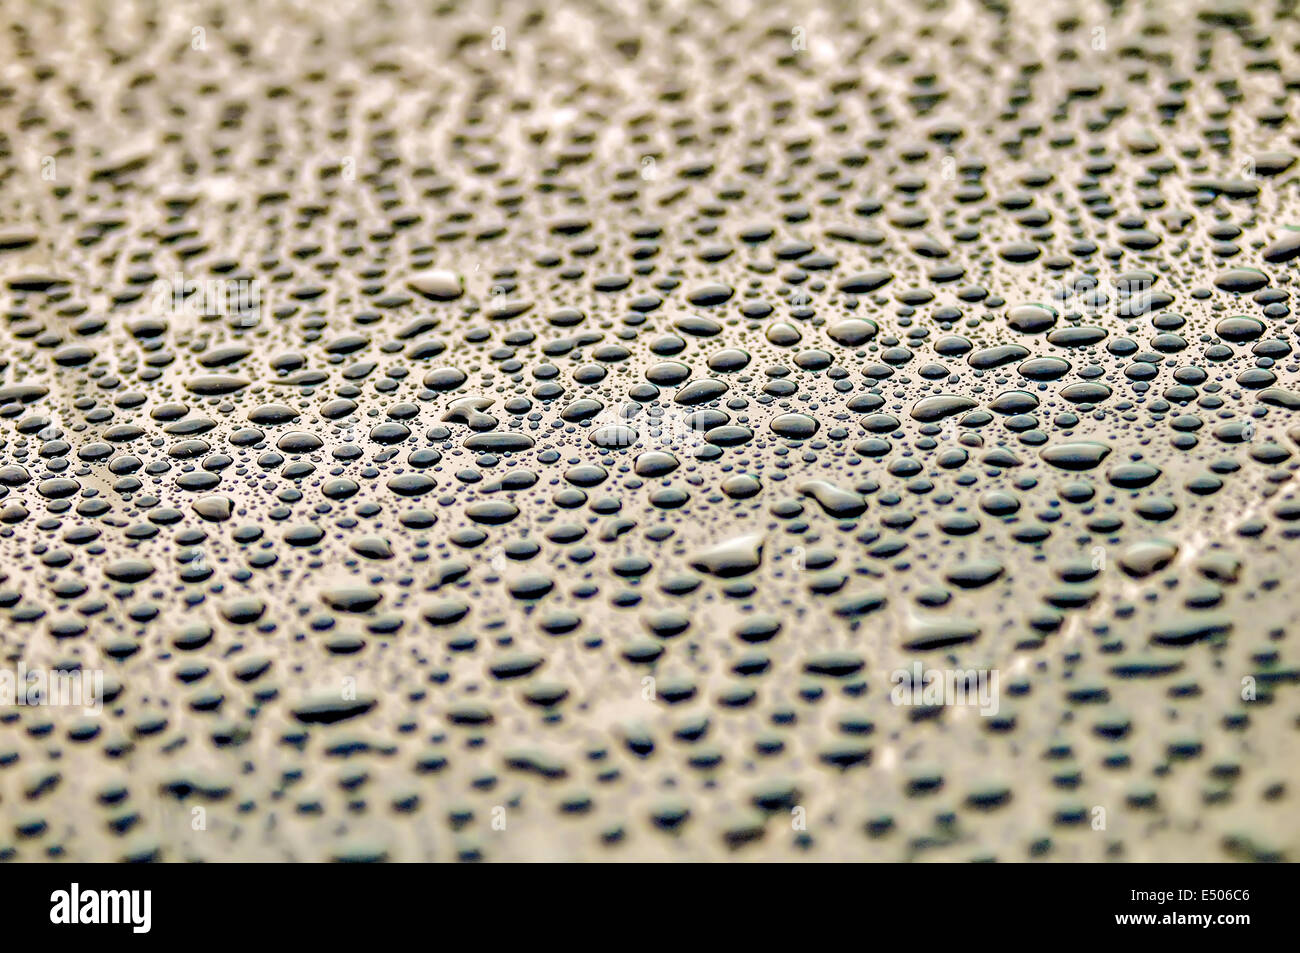 drops on water-repellent surface Stock Photo